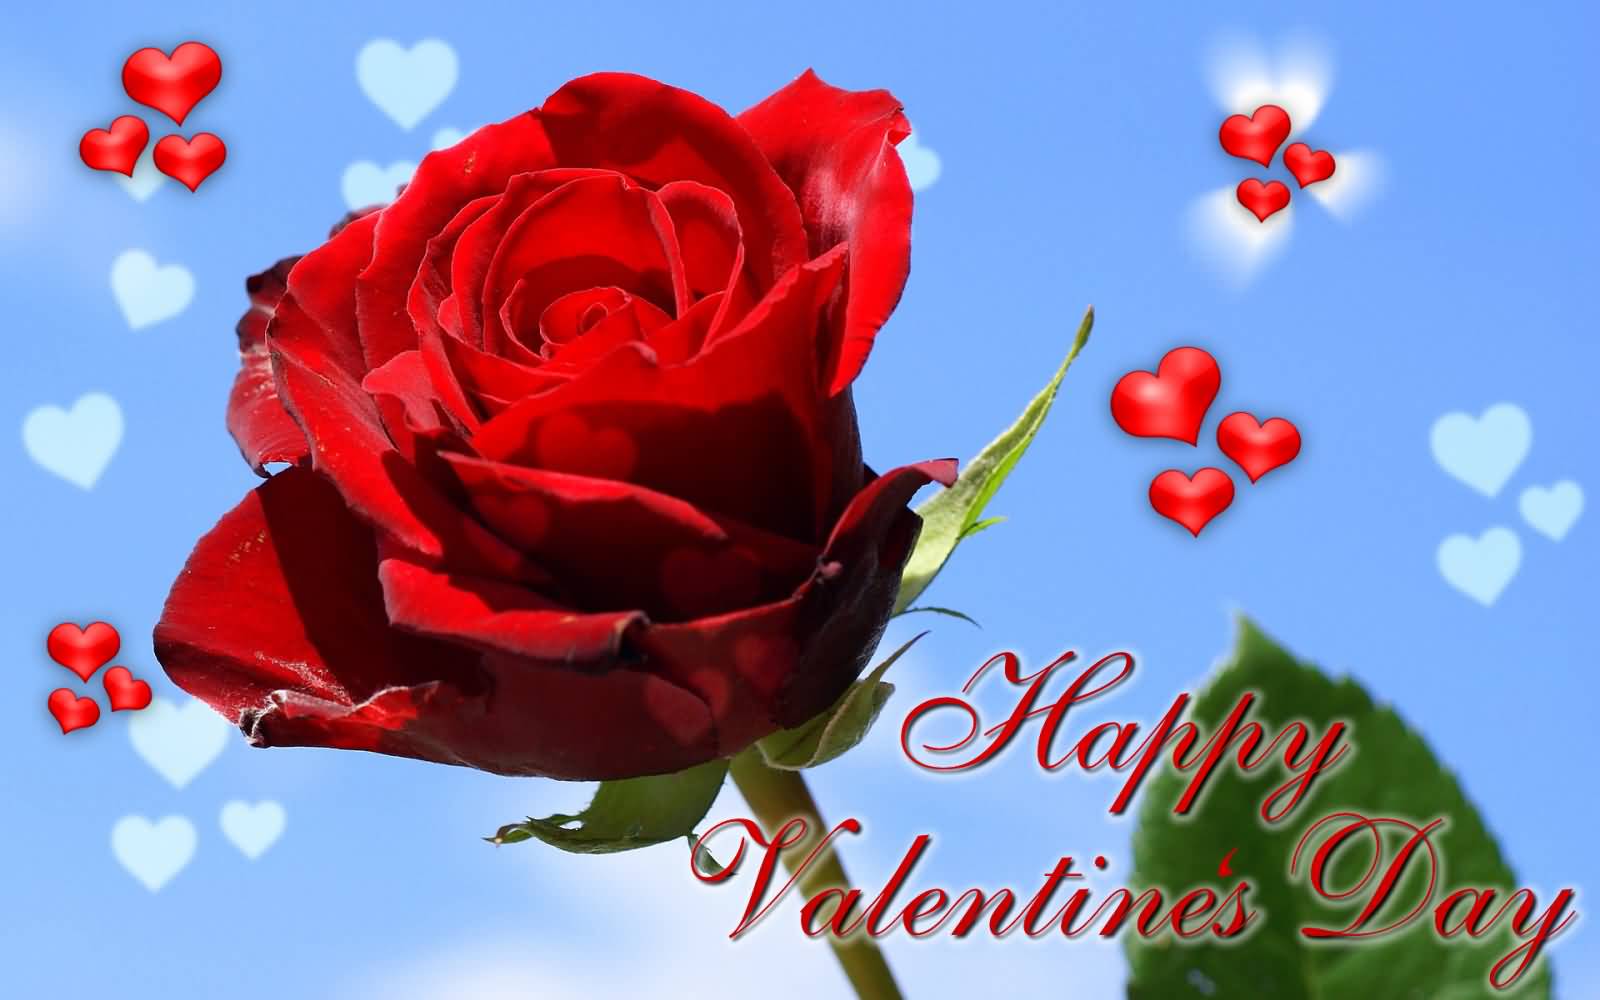 Happy Valentine’s Day Rose Flower Bud And Hearts Wallpaper